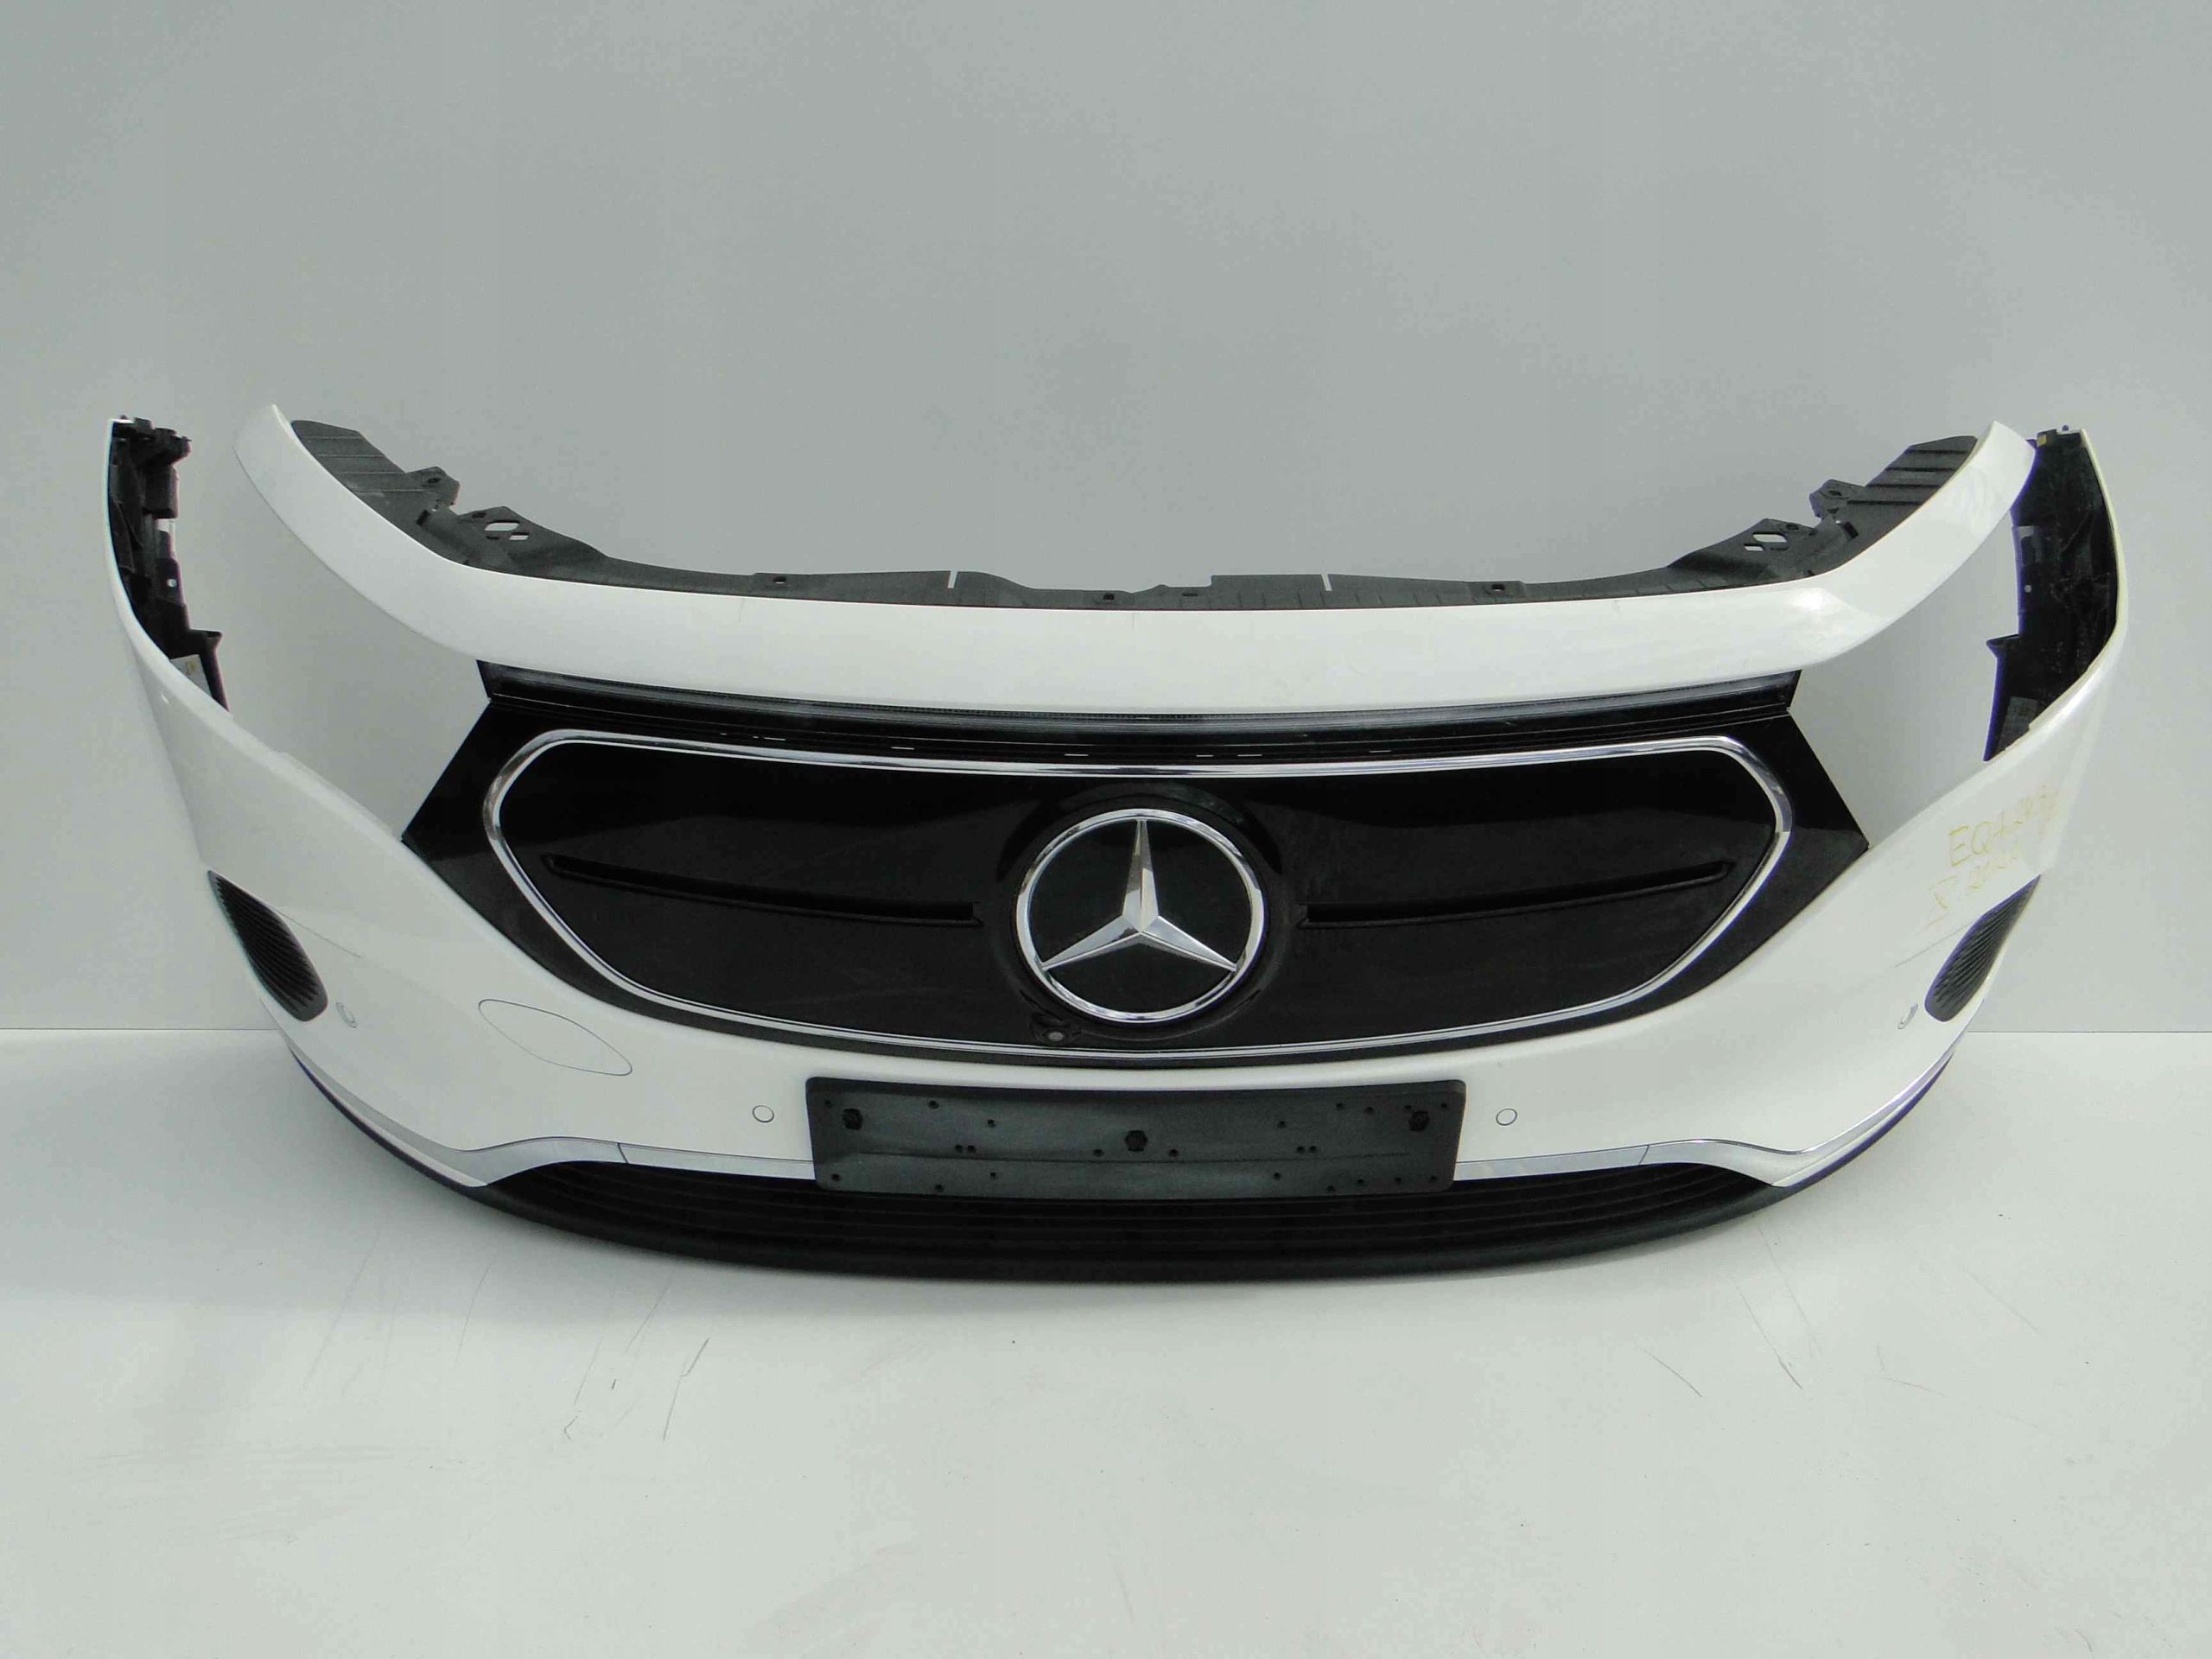 MERCEDES EQA CAR COVER 2020 ONWARDS H243 - CarsCovers